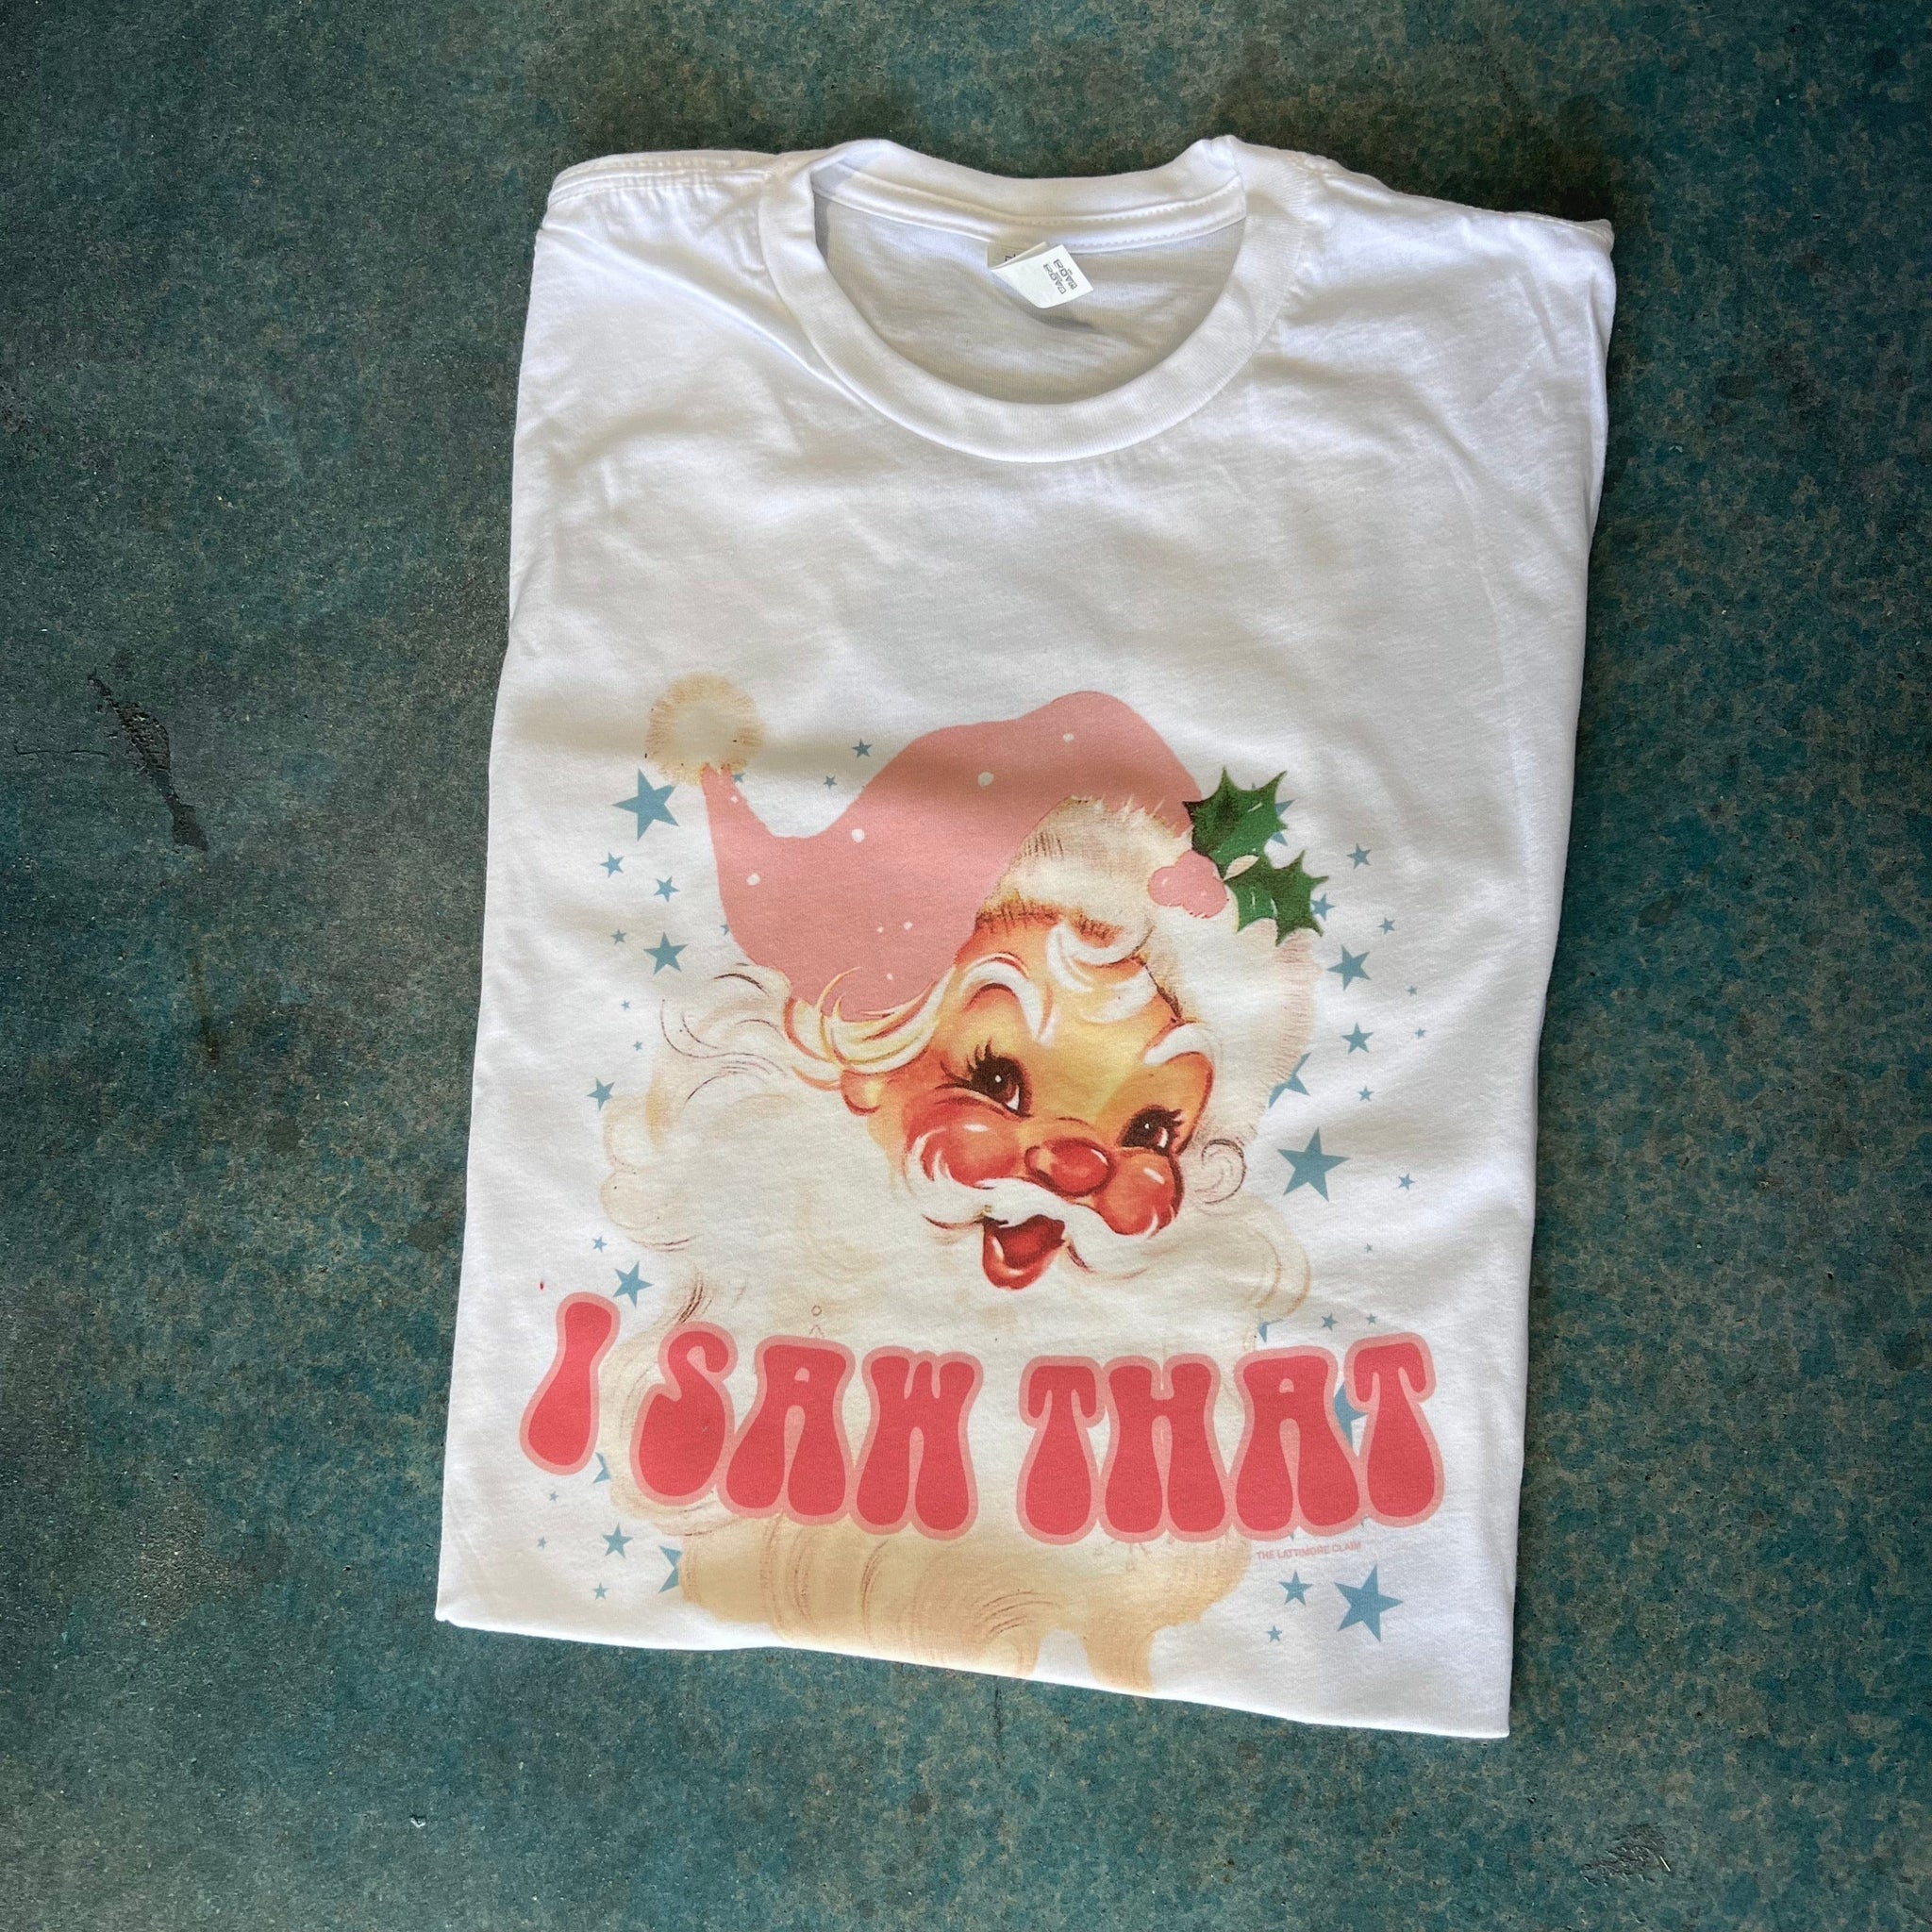 This white tee features a crew neckline, short sleeves, and a hand drawn graphic of a vintage Santa Clause with rosy cheeks wearing a light pink hat. There are blue stars around him of various sizes, along with the words "I SAW THAT" in a fun hot pink bubble font with light pink outline. It is shown here as a folded flatlay. 